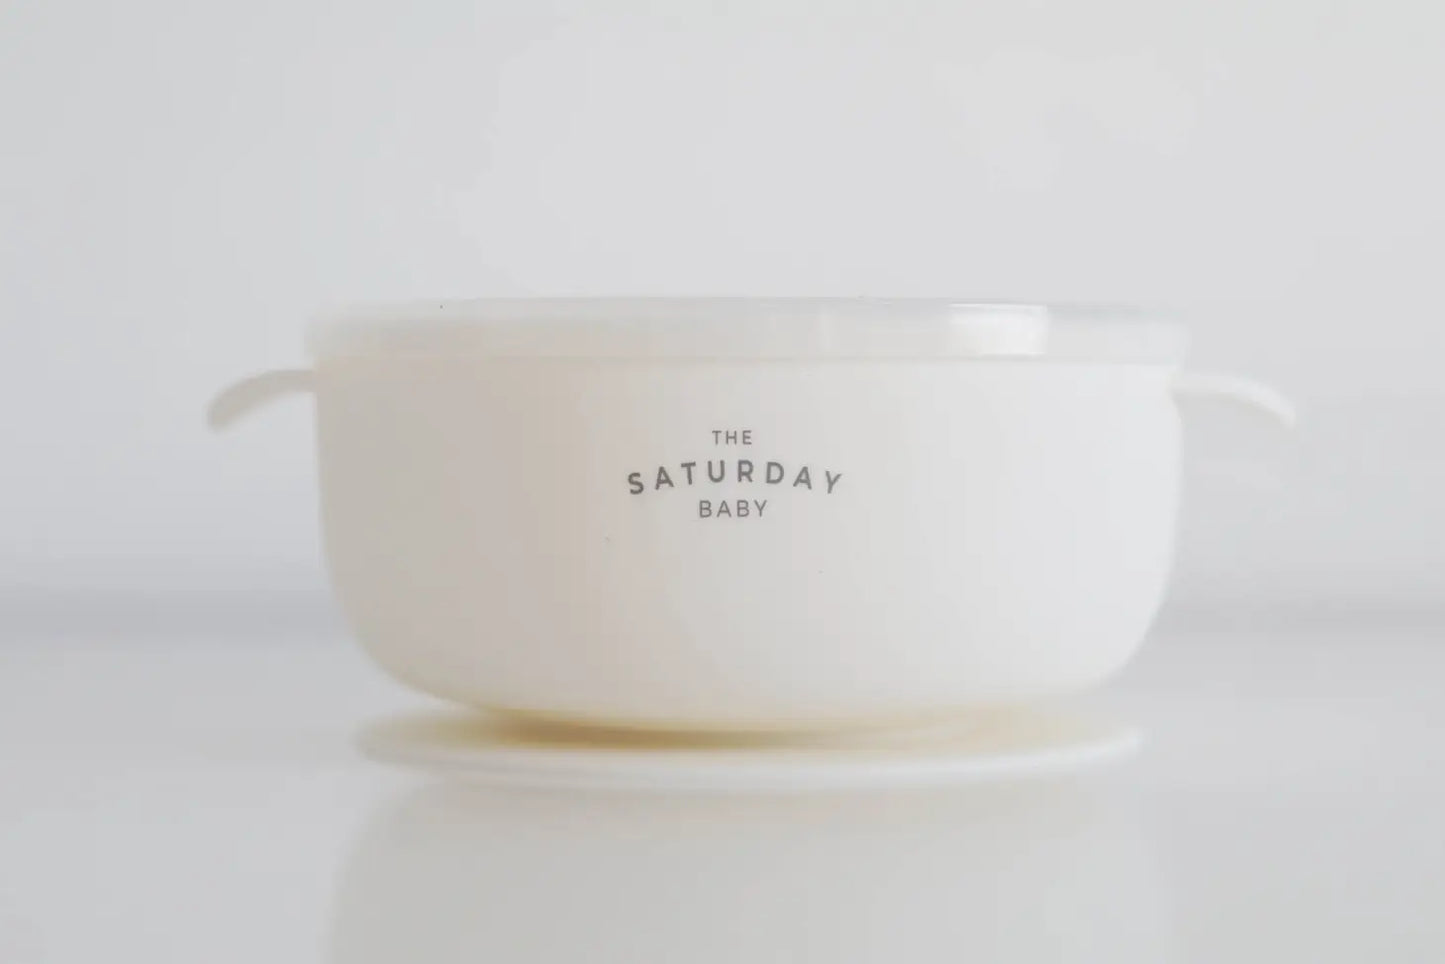 Suction Bowl With Lid